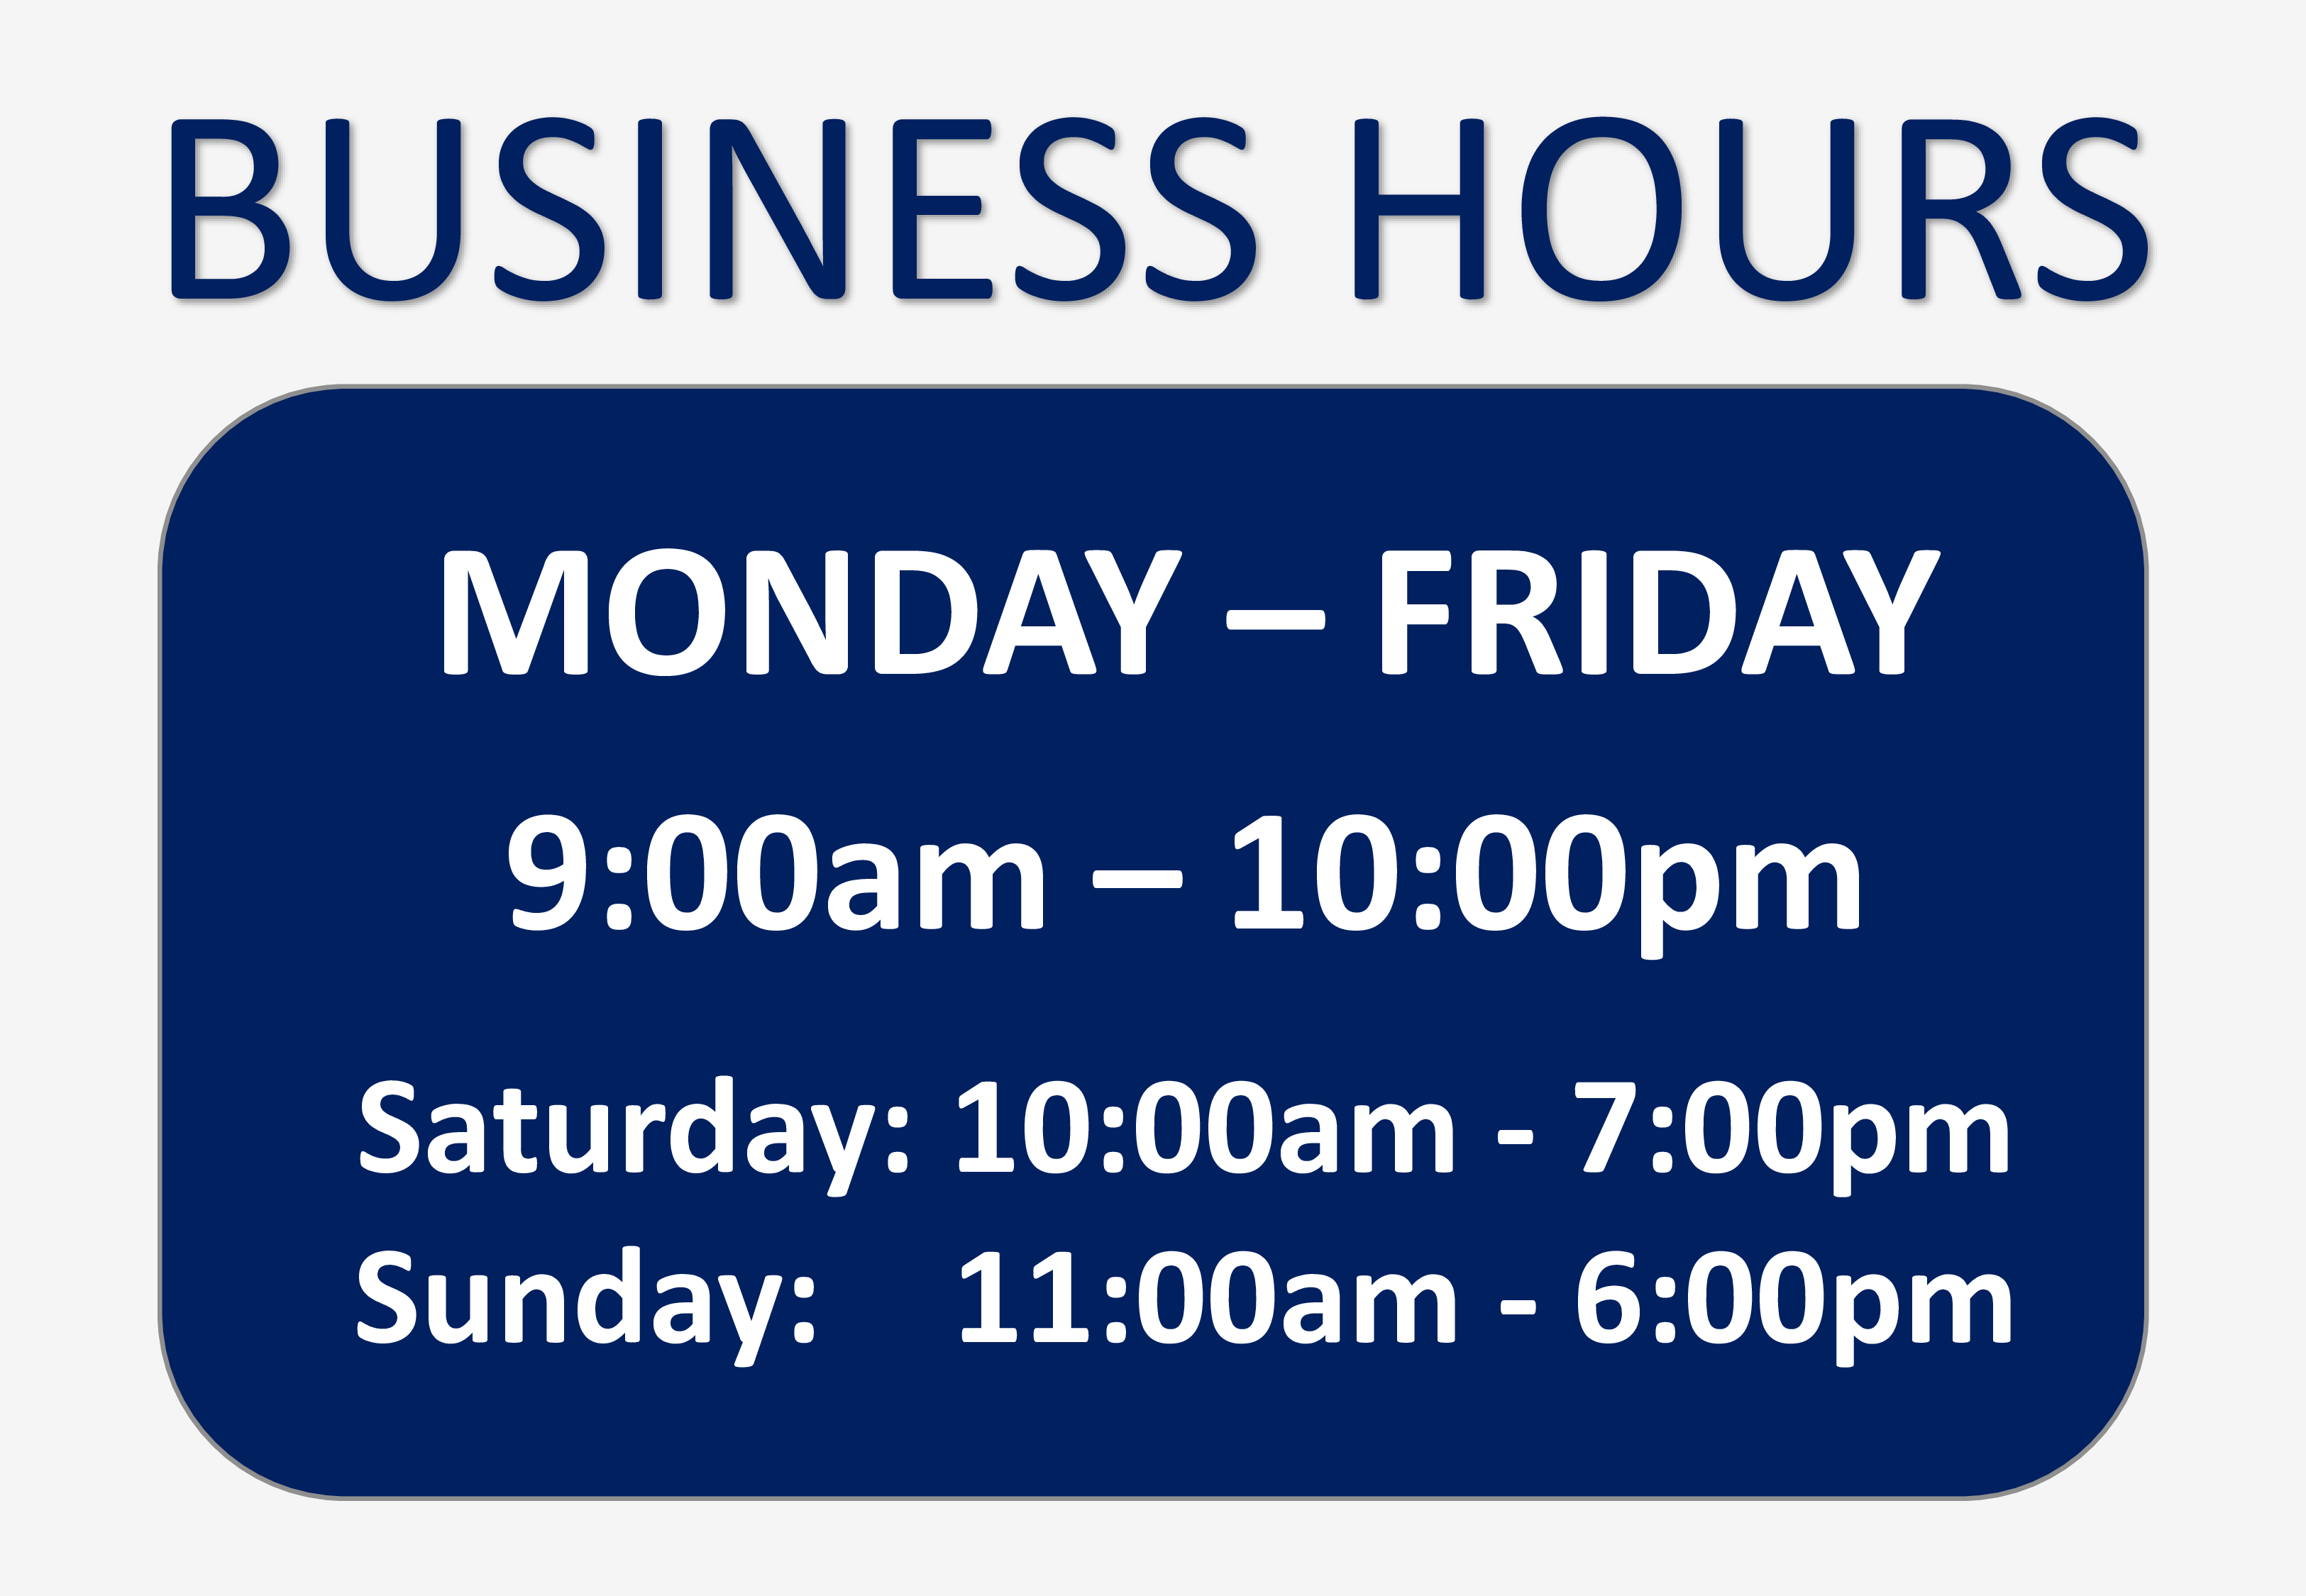 Business Hours Sign main image